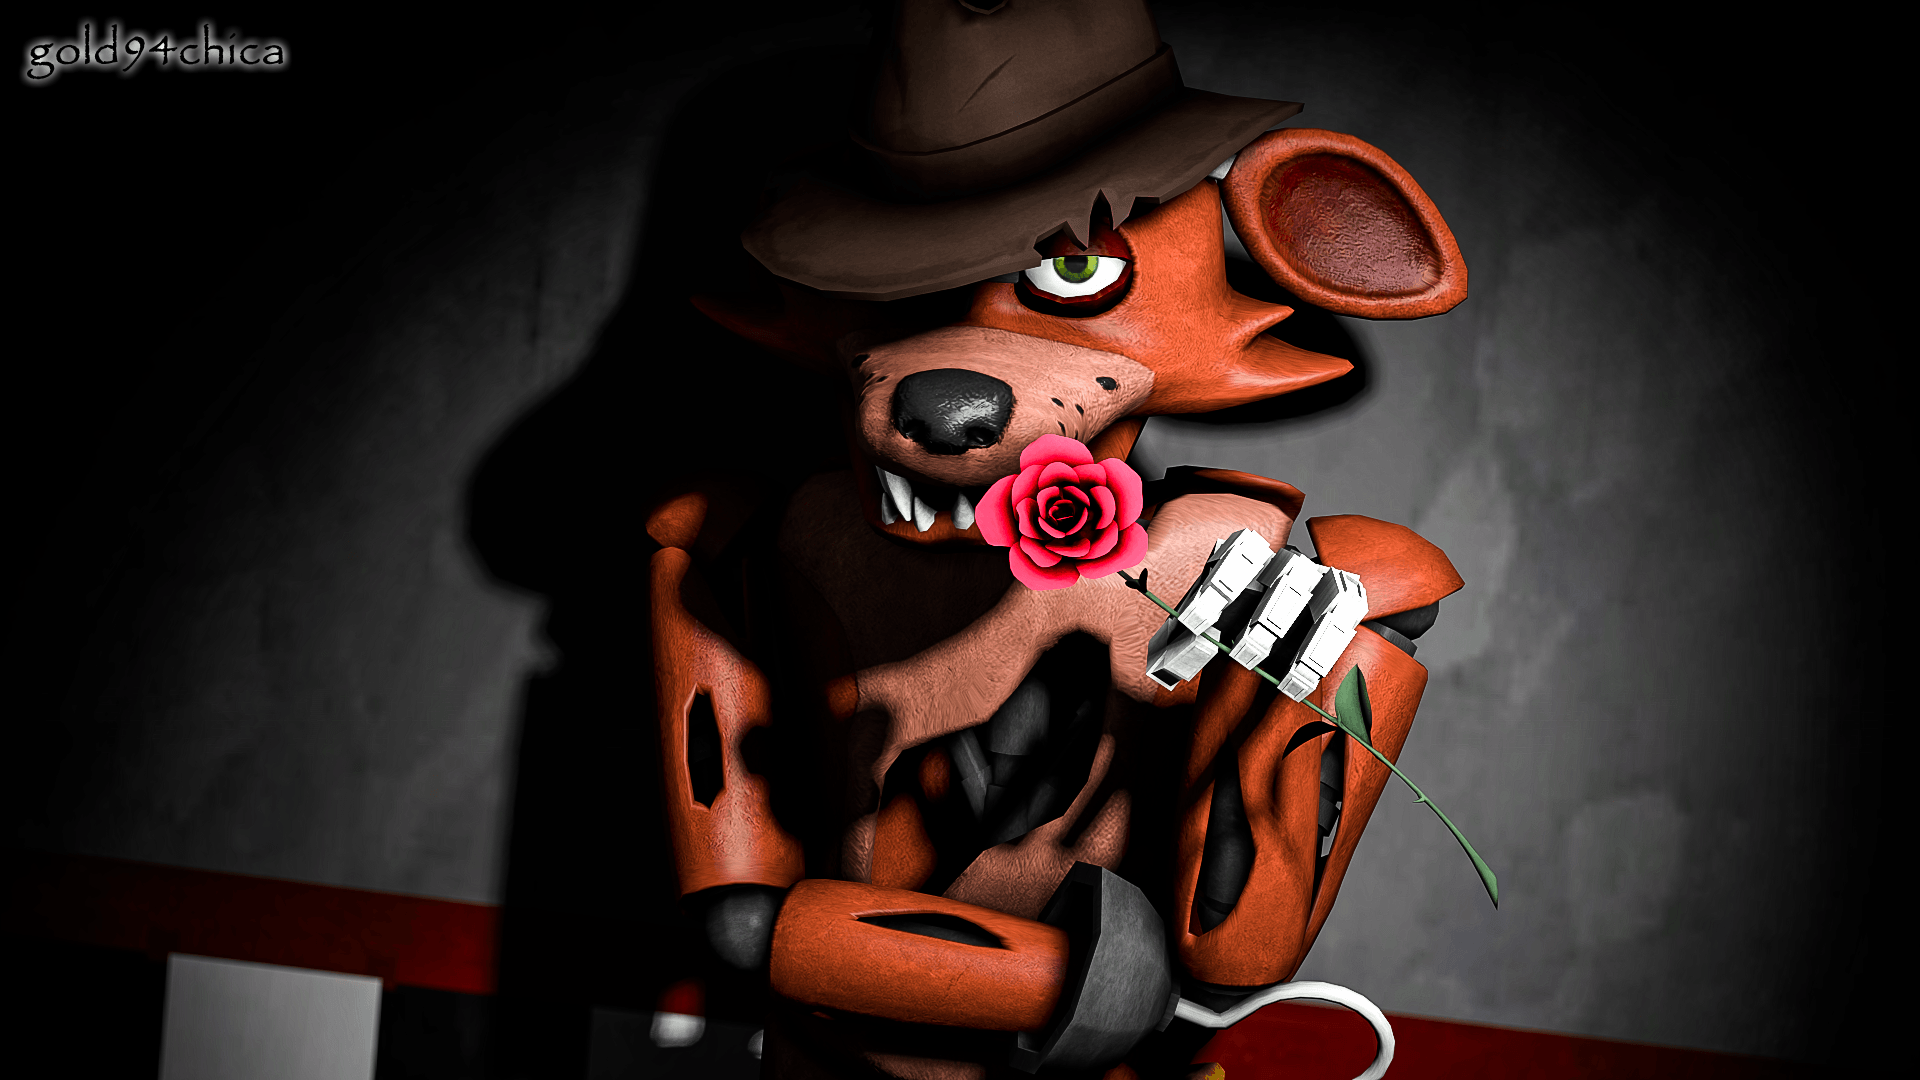 Oh, I&;ve been waiting for you (Foxy SFM Wallpaper)